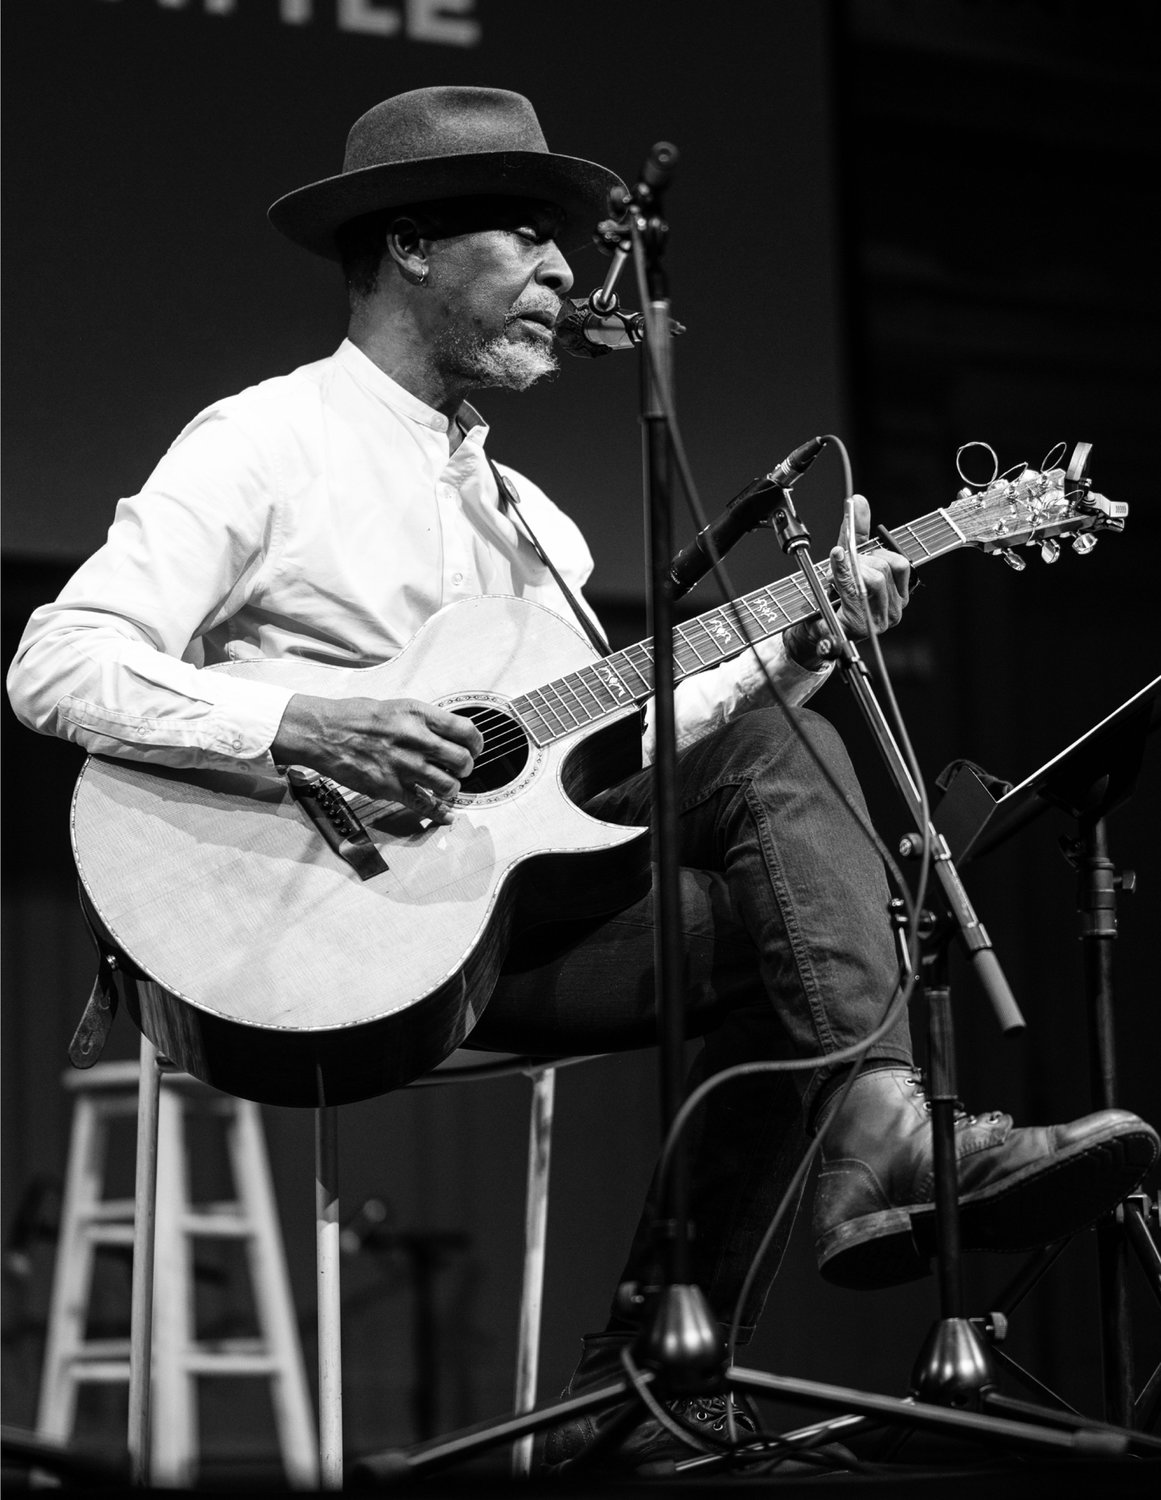 Reggie Garrett will bring his urban acoustic folk-rock to Finnriver Farm & Cidery on Saturday, Aug. 6 for a performance that will also feature Paul Benoit.